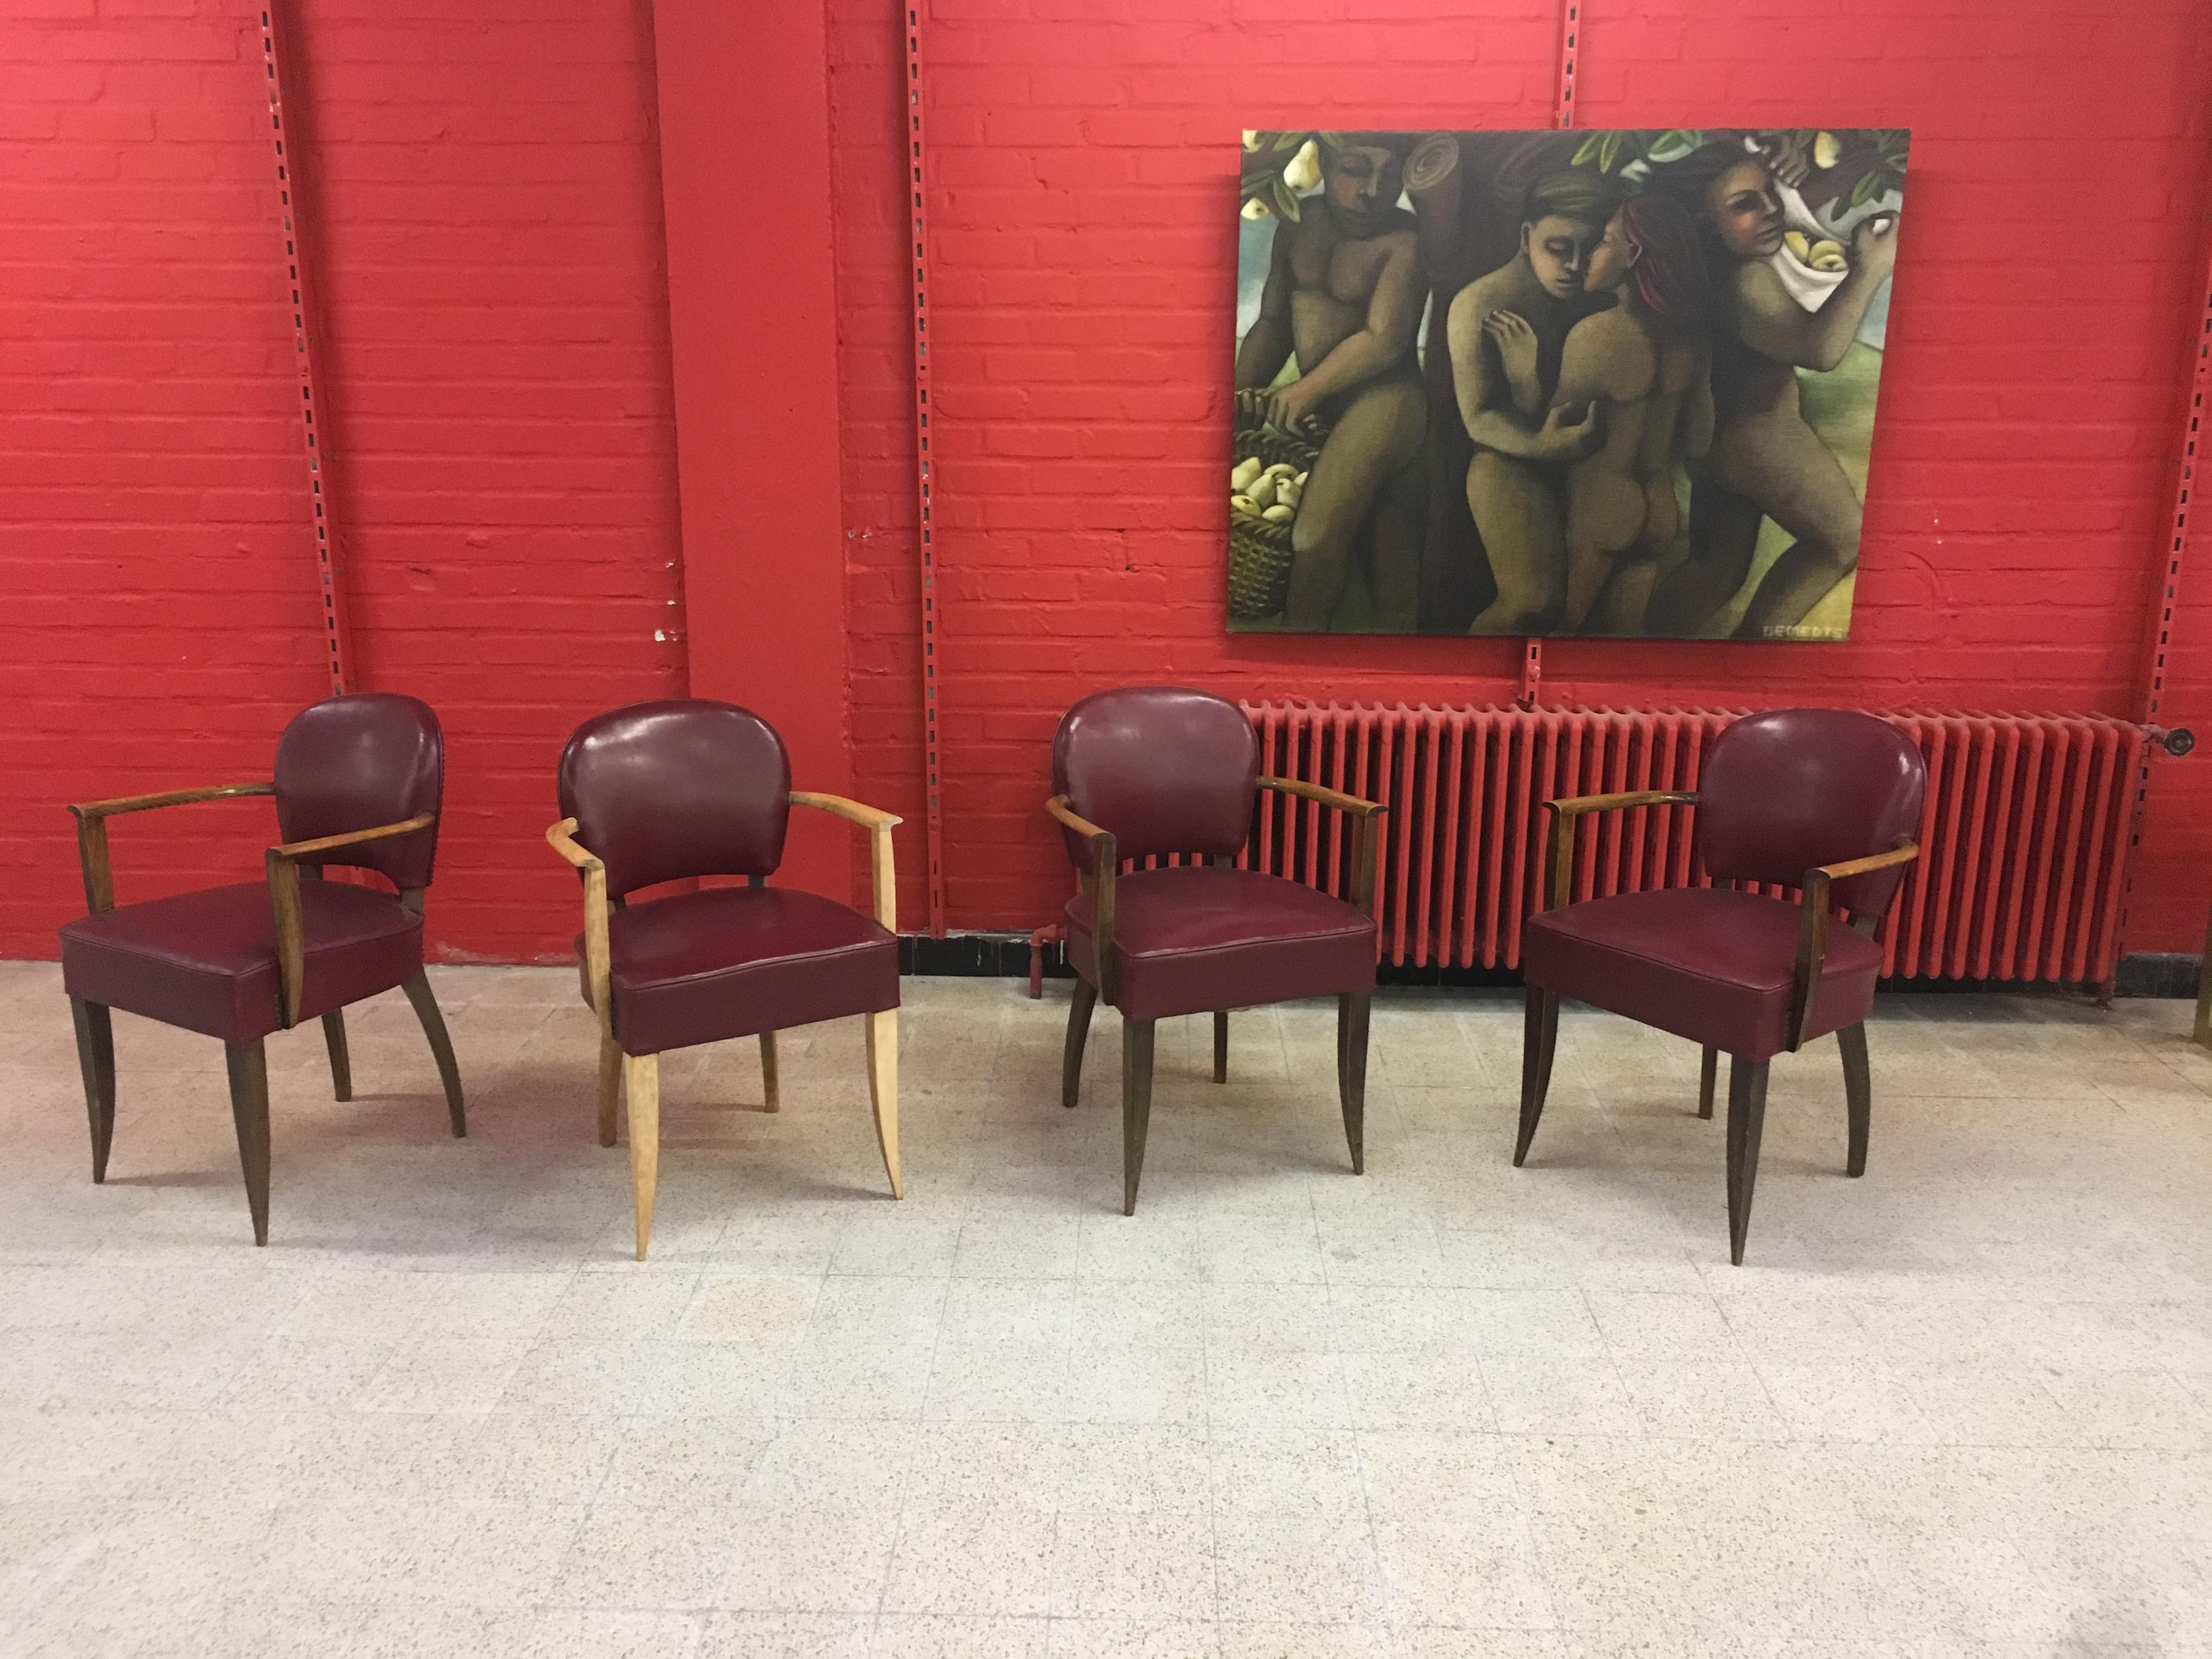 4 Art Deco armchairs in the style of Jules Leleu, circa 1930-1940
beech armchair of which 1 was partially stripped.
Backrest and seat covered with faux leather, in good condition, but with some small flaws.